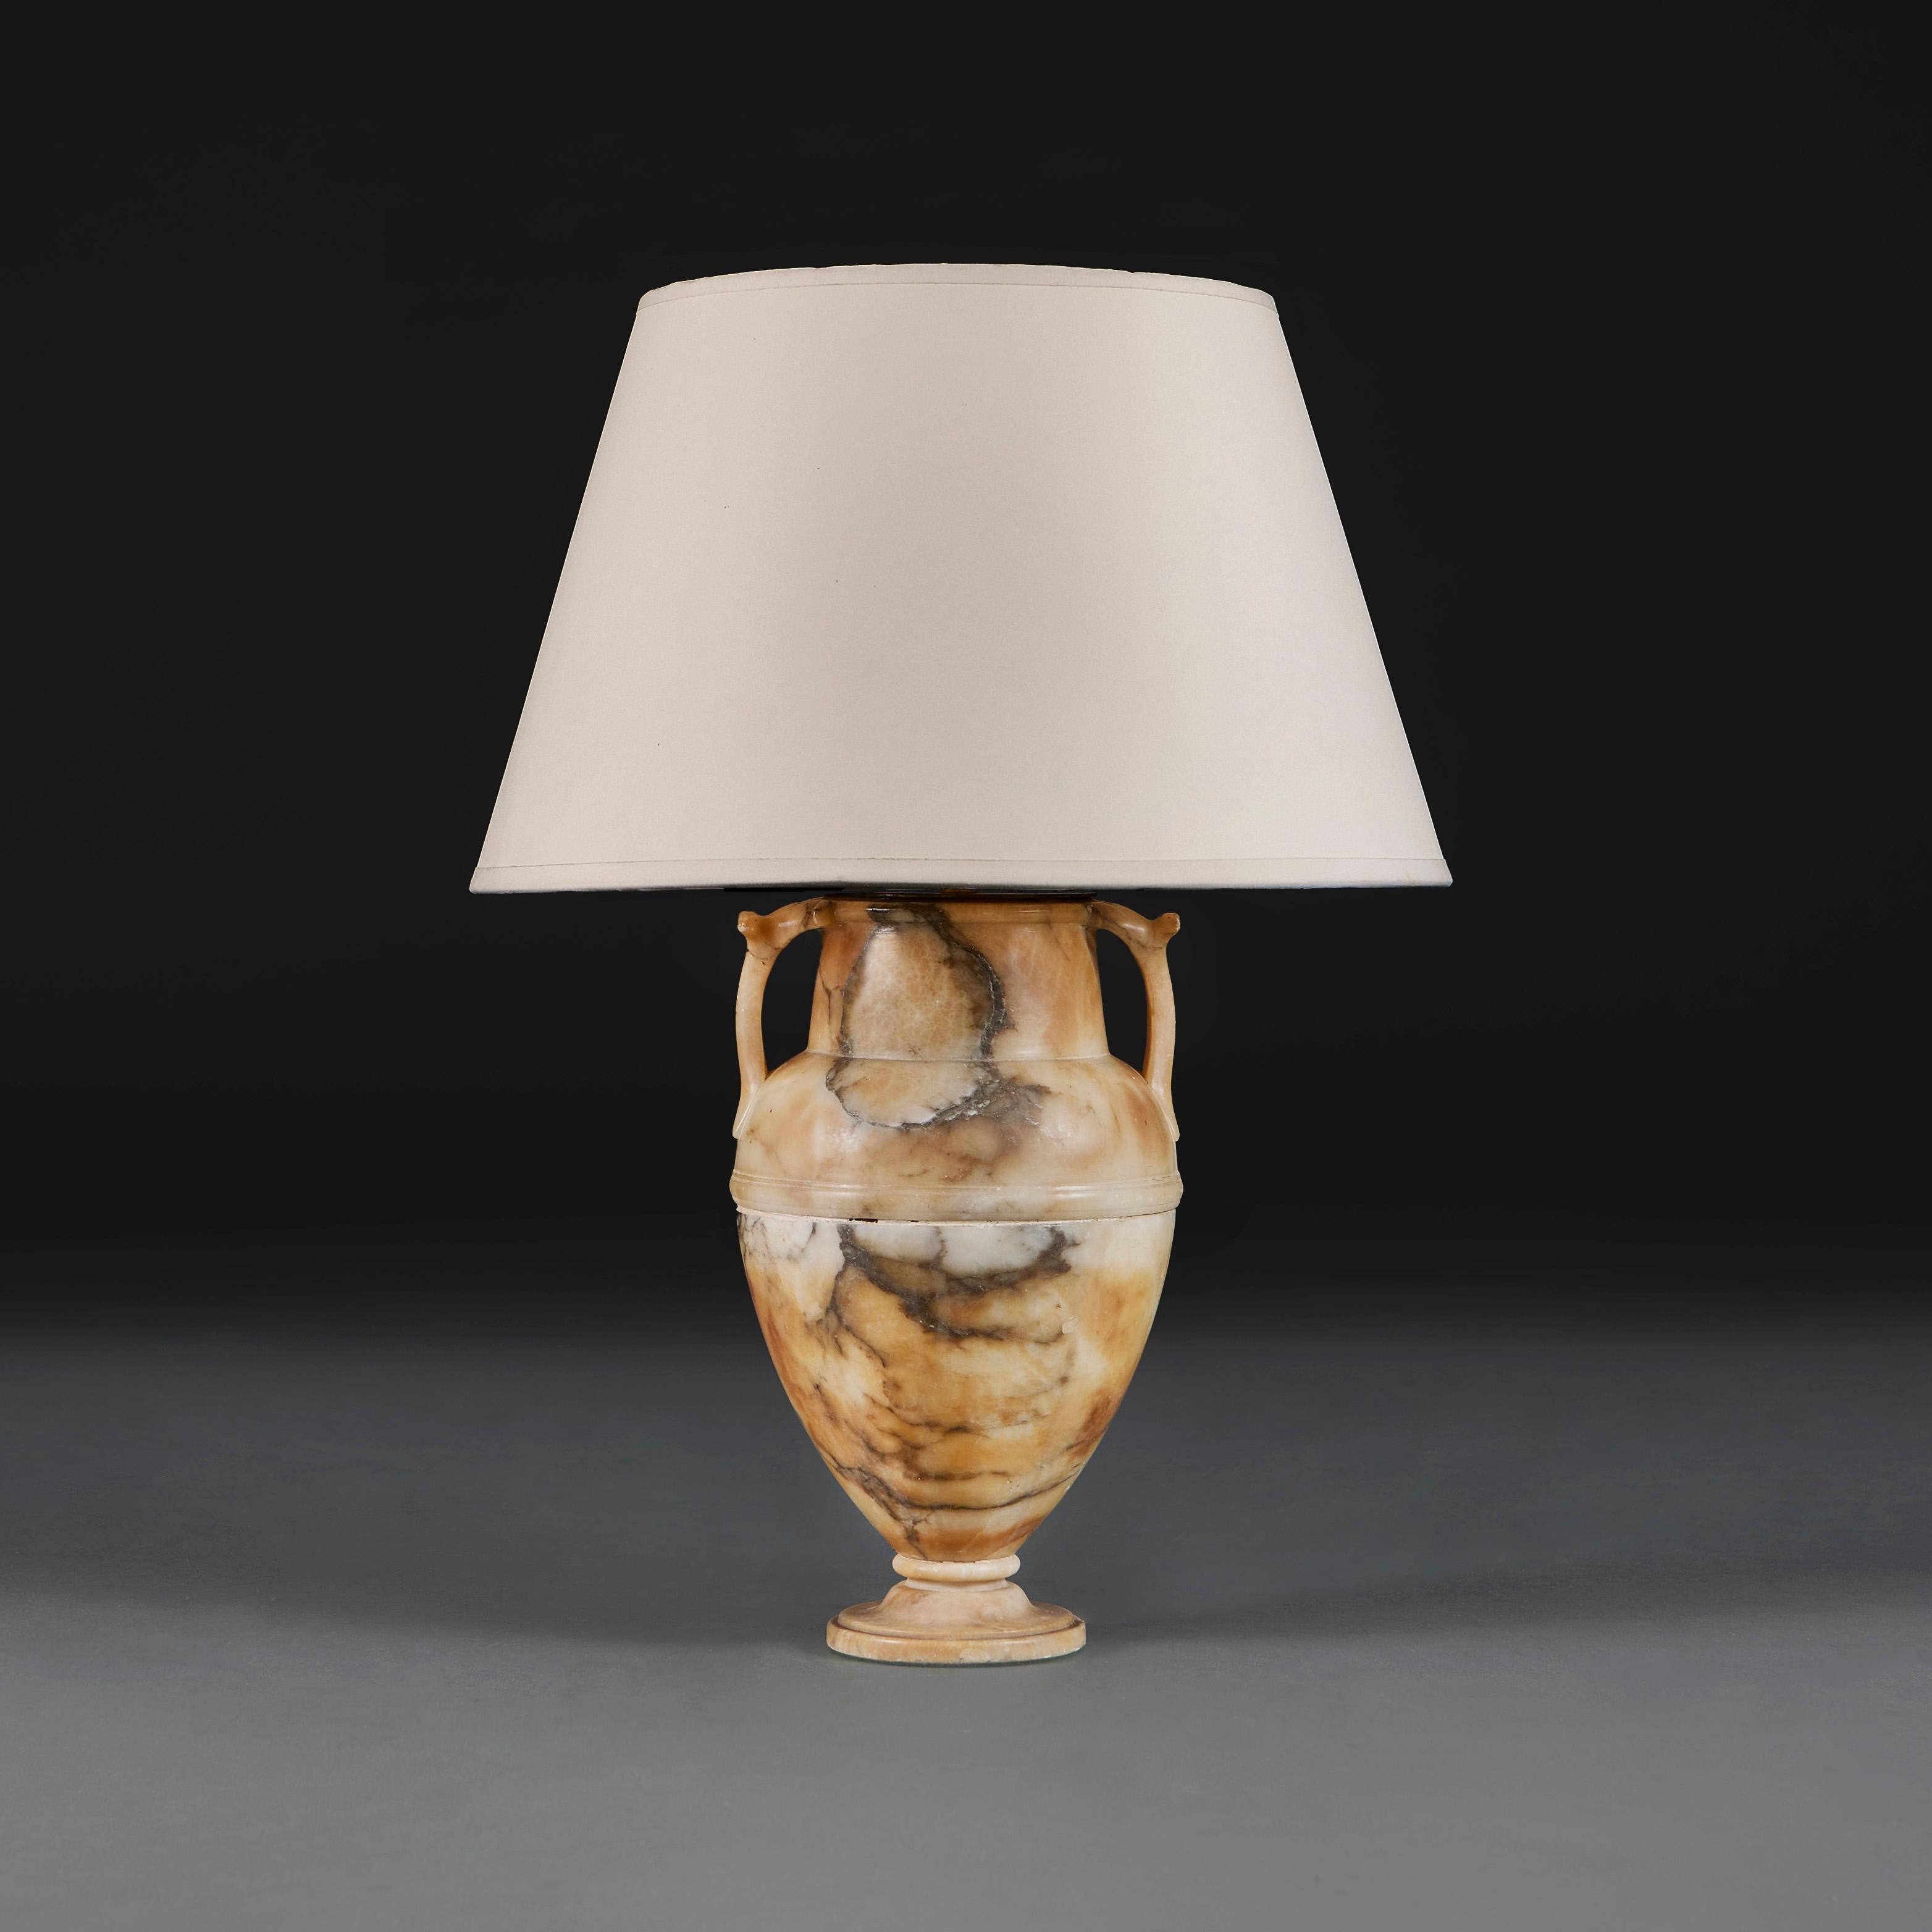 Italy, circa 1850

A mid nineteenth century alabaster urn with grey veining and curved handles, now mounted as a lamp.

Height of urn 29.00cm

Diameter 18.00cm

Photographed with a 16” diameter Pembroke card lampshade.

Please note: This is